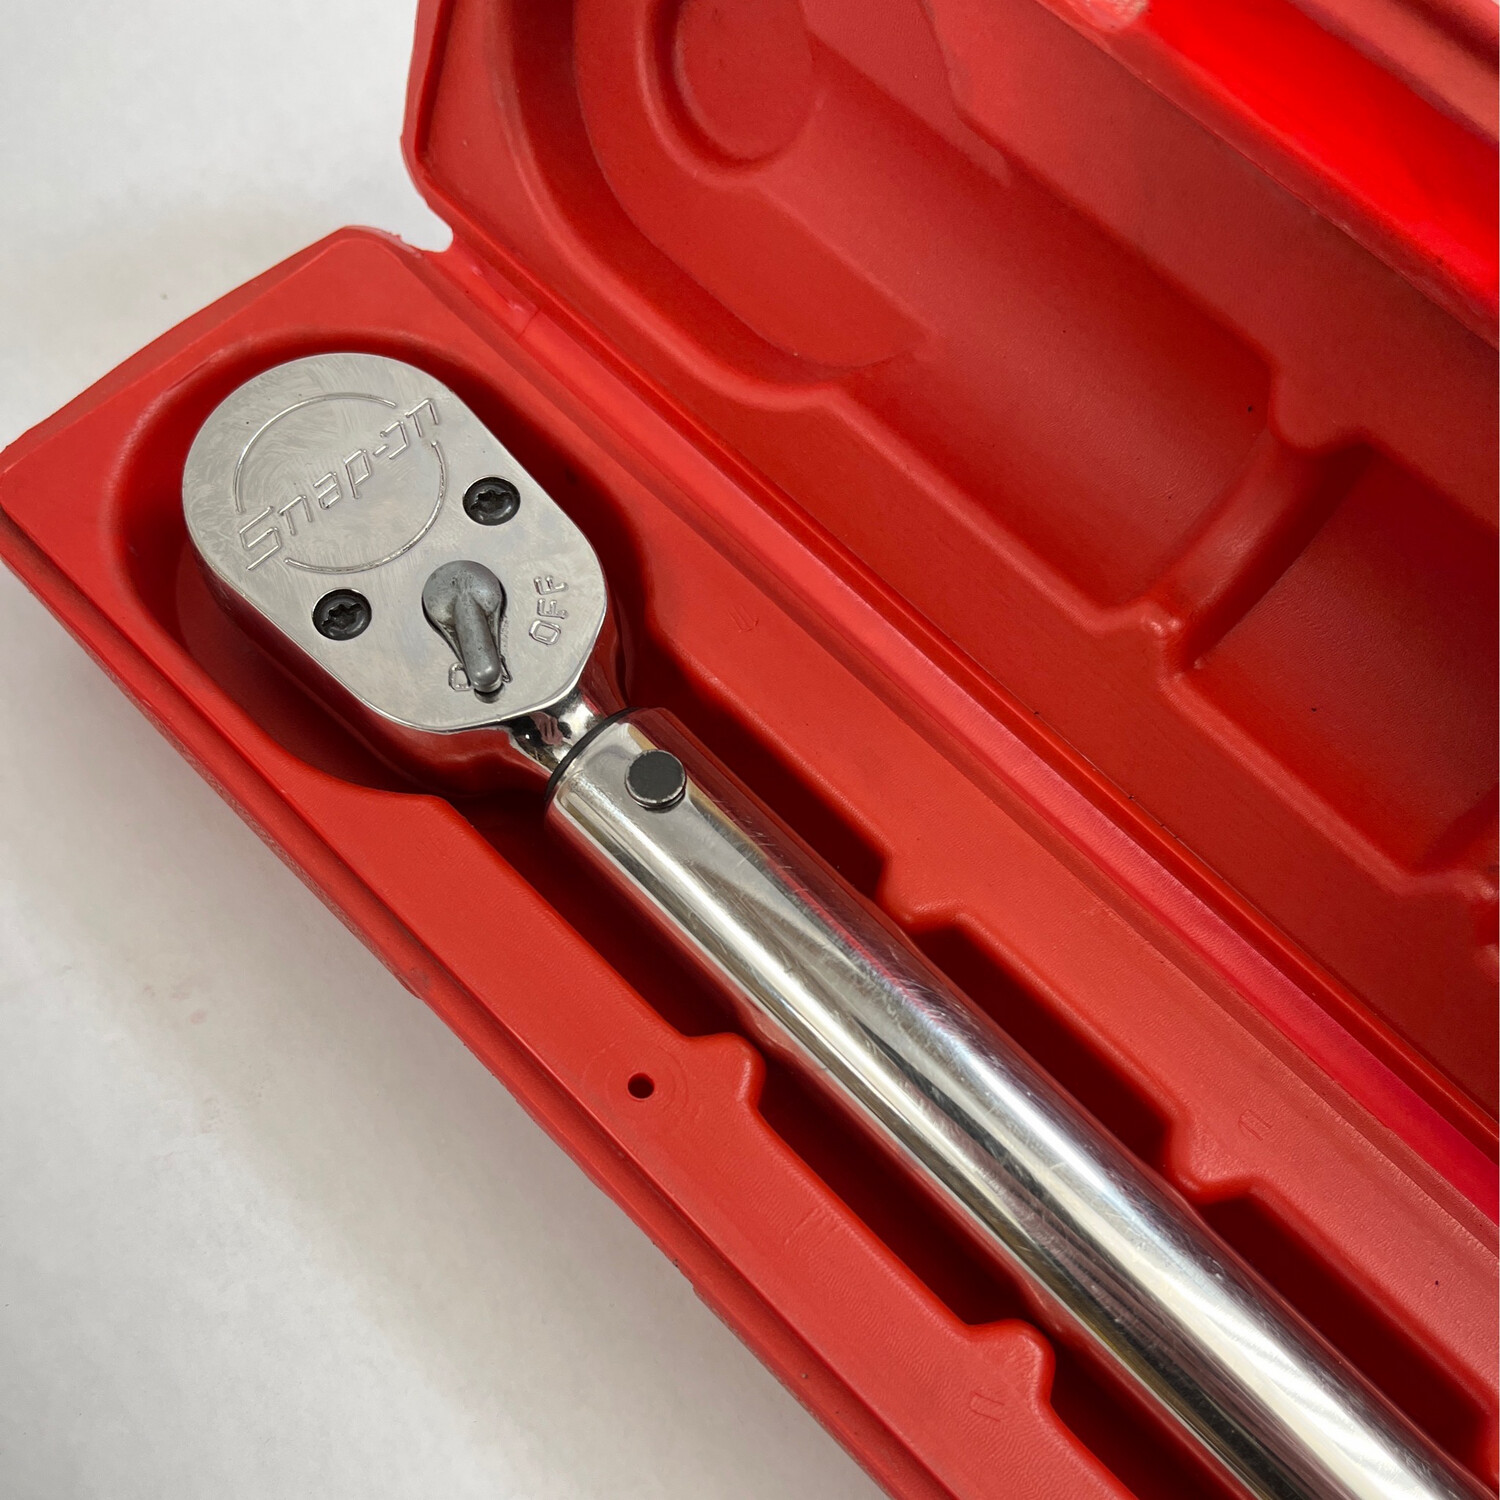 Snap On 1/2" Drive Adjustable Click-Type Fixed Ratchet Torque Wrench  (50–250 ft-lb)